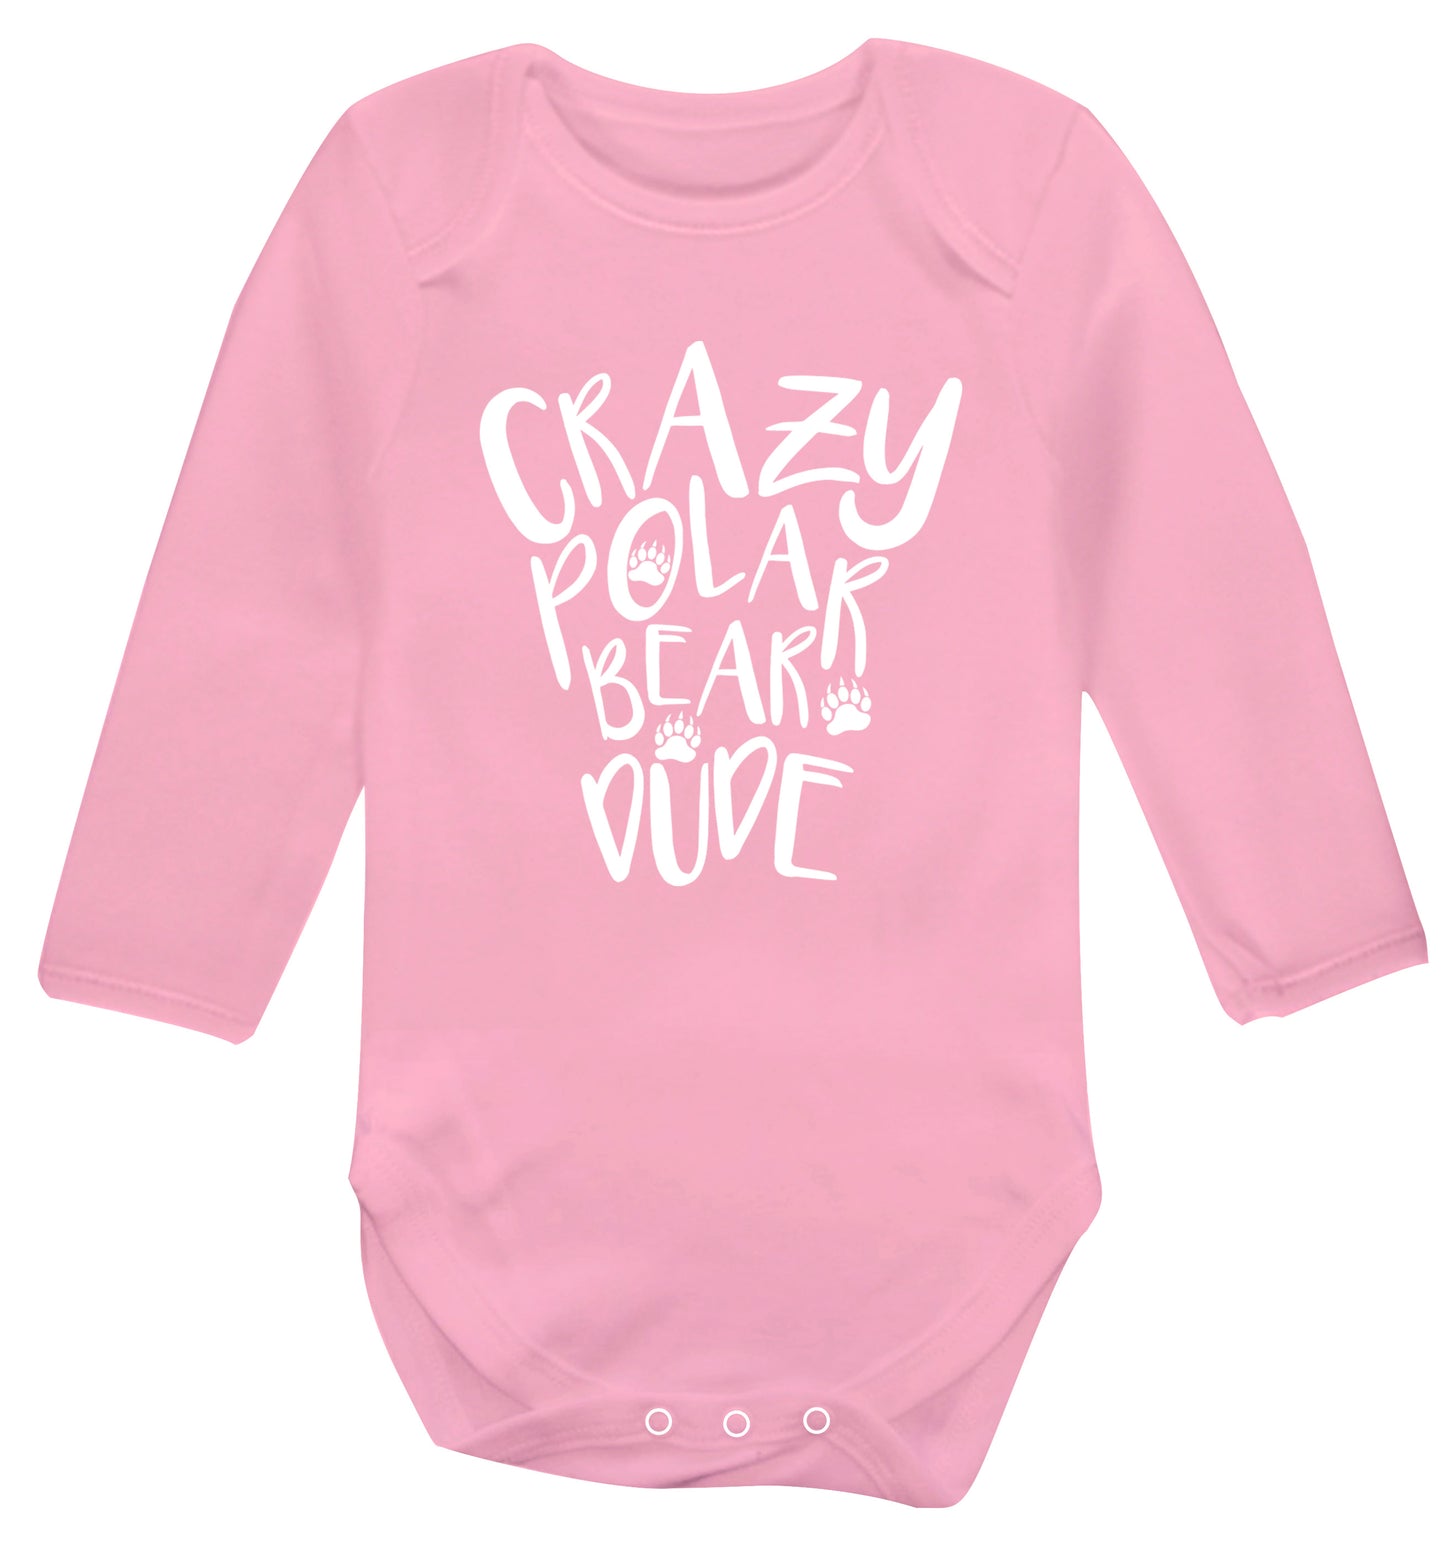 Crazy polar bear dude Baby Vest long sleeved pale pink 6-12 months